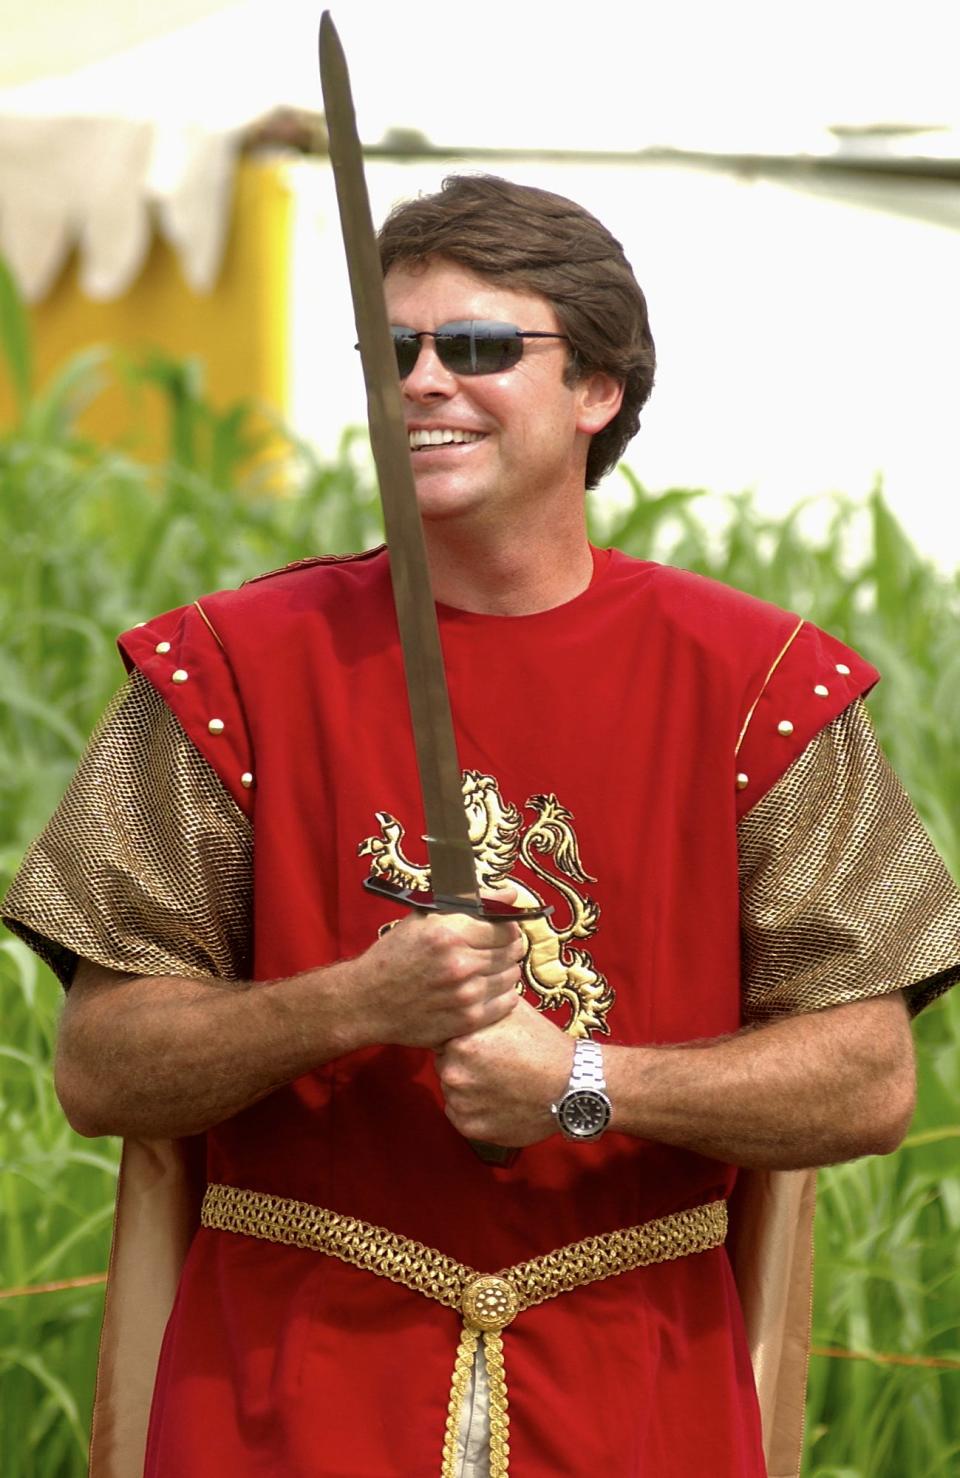 Larry Davis wields a sword during the opening day at Davis Mega Maze in Sterling on Aug. 7, 2003.